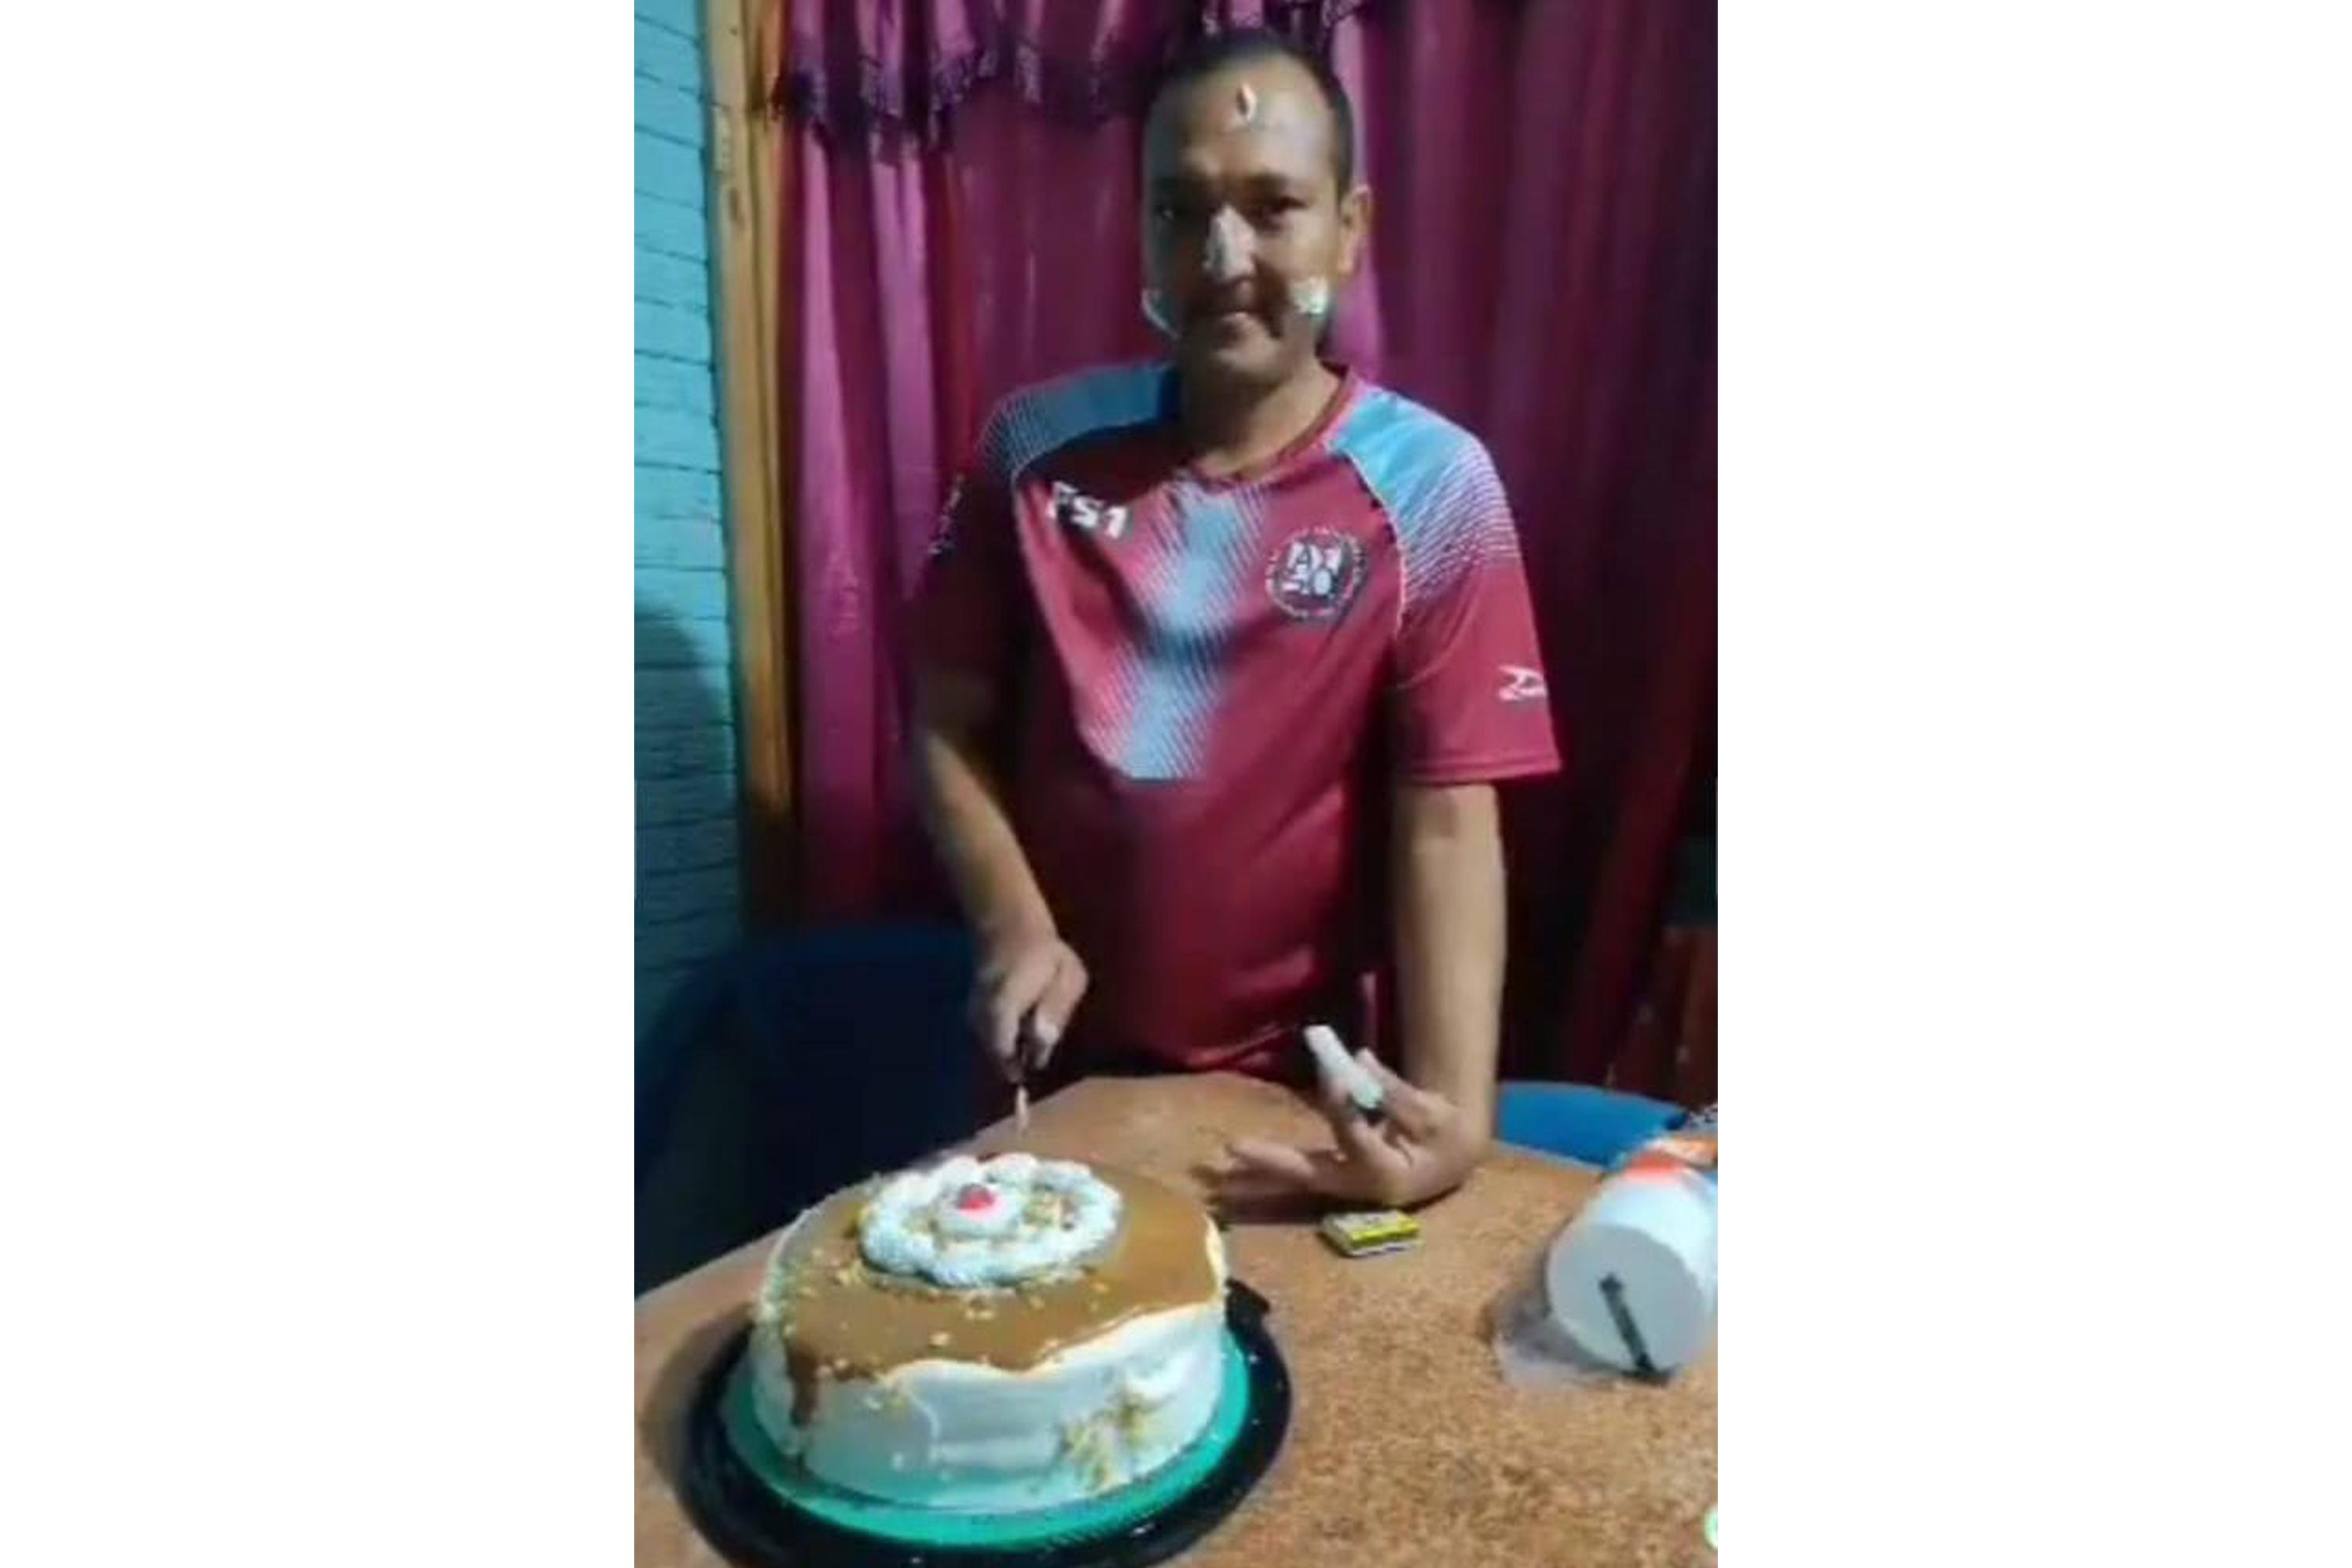 Marco Tulio Castillo Reyes, whose friends knew him as Teco, was a soccer player who worked for Guzmán as a taxi driver. According to Guzmán, Teco had no gang affiliations. He died in May 2022 as a result of a beating from prison guards, according to Guzmán. Photo El Faro